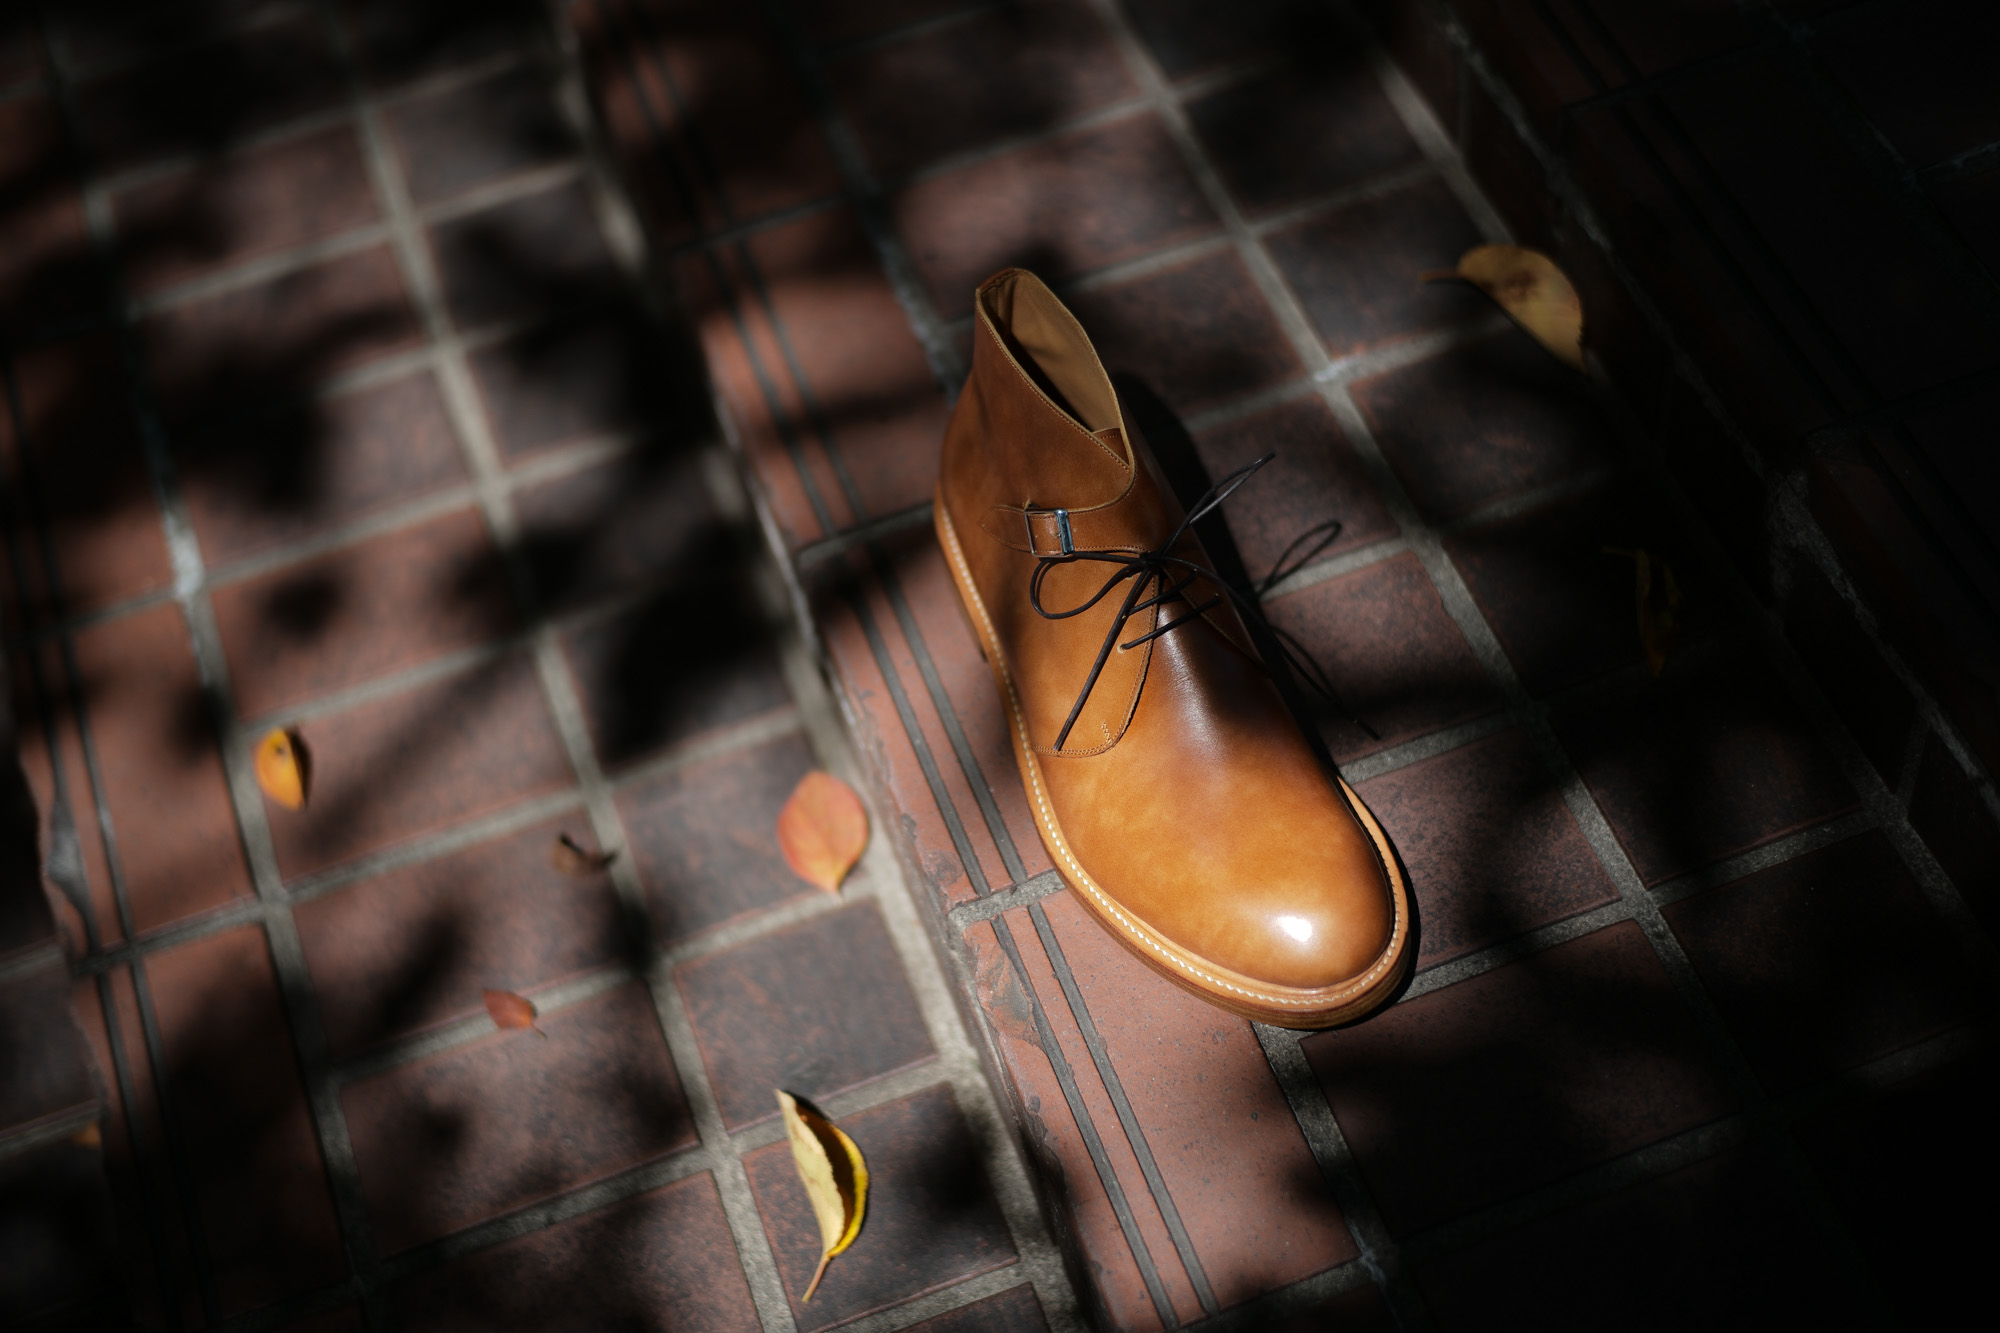 Cuervo (クエルボ)  【2018 SS NEW MODEL】Derringer (デリンジャー) 【Japan Museum Calf Leather//ジャパン ミュージアムカーフレザー】 Goodyear Welt Process Double Leather Sole  Chukkaboots NEW GOLD(ニューゴールド) MADE IN JAPAN 【Special Model 1st sample】　cuervoクエルボ チャッカブーツ 愛知 名古屋 Alto e Diritto アルト エ デリット 5.5,6,6.5,7,7.5,8,8.5,9,9.5